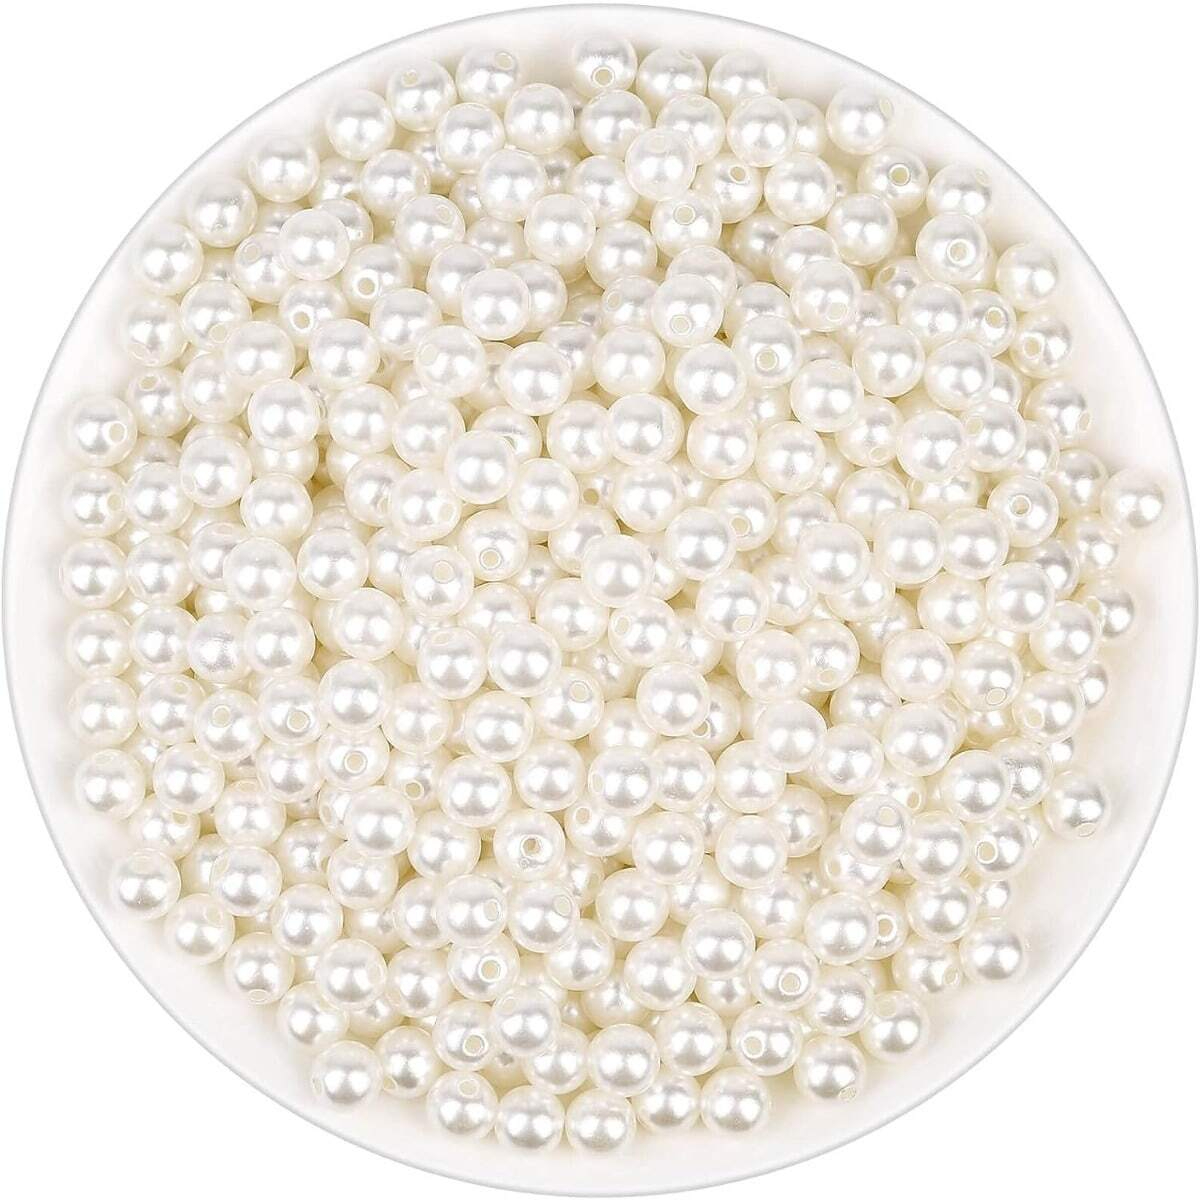  Ankom 3-4mm Tiny Freshwater Pearl Beads Small Natural White  Pearls Seed Bead for Jewelry Making DIY Bracelet Necklace Rings Gift 36cm -  (Color: White, Item Diameter: About 3-4mm) : Arts, Crafts